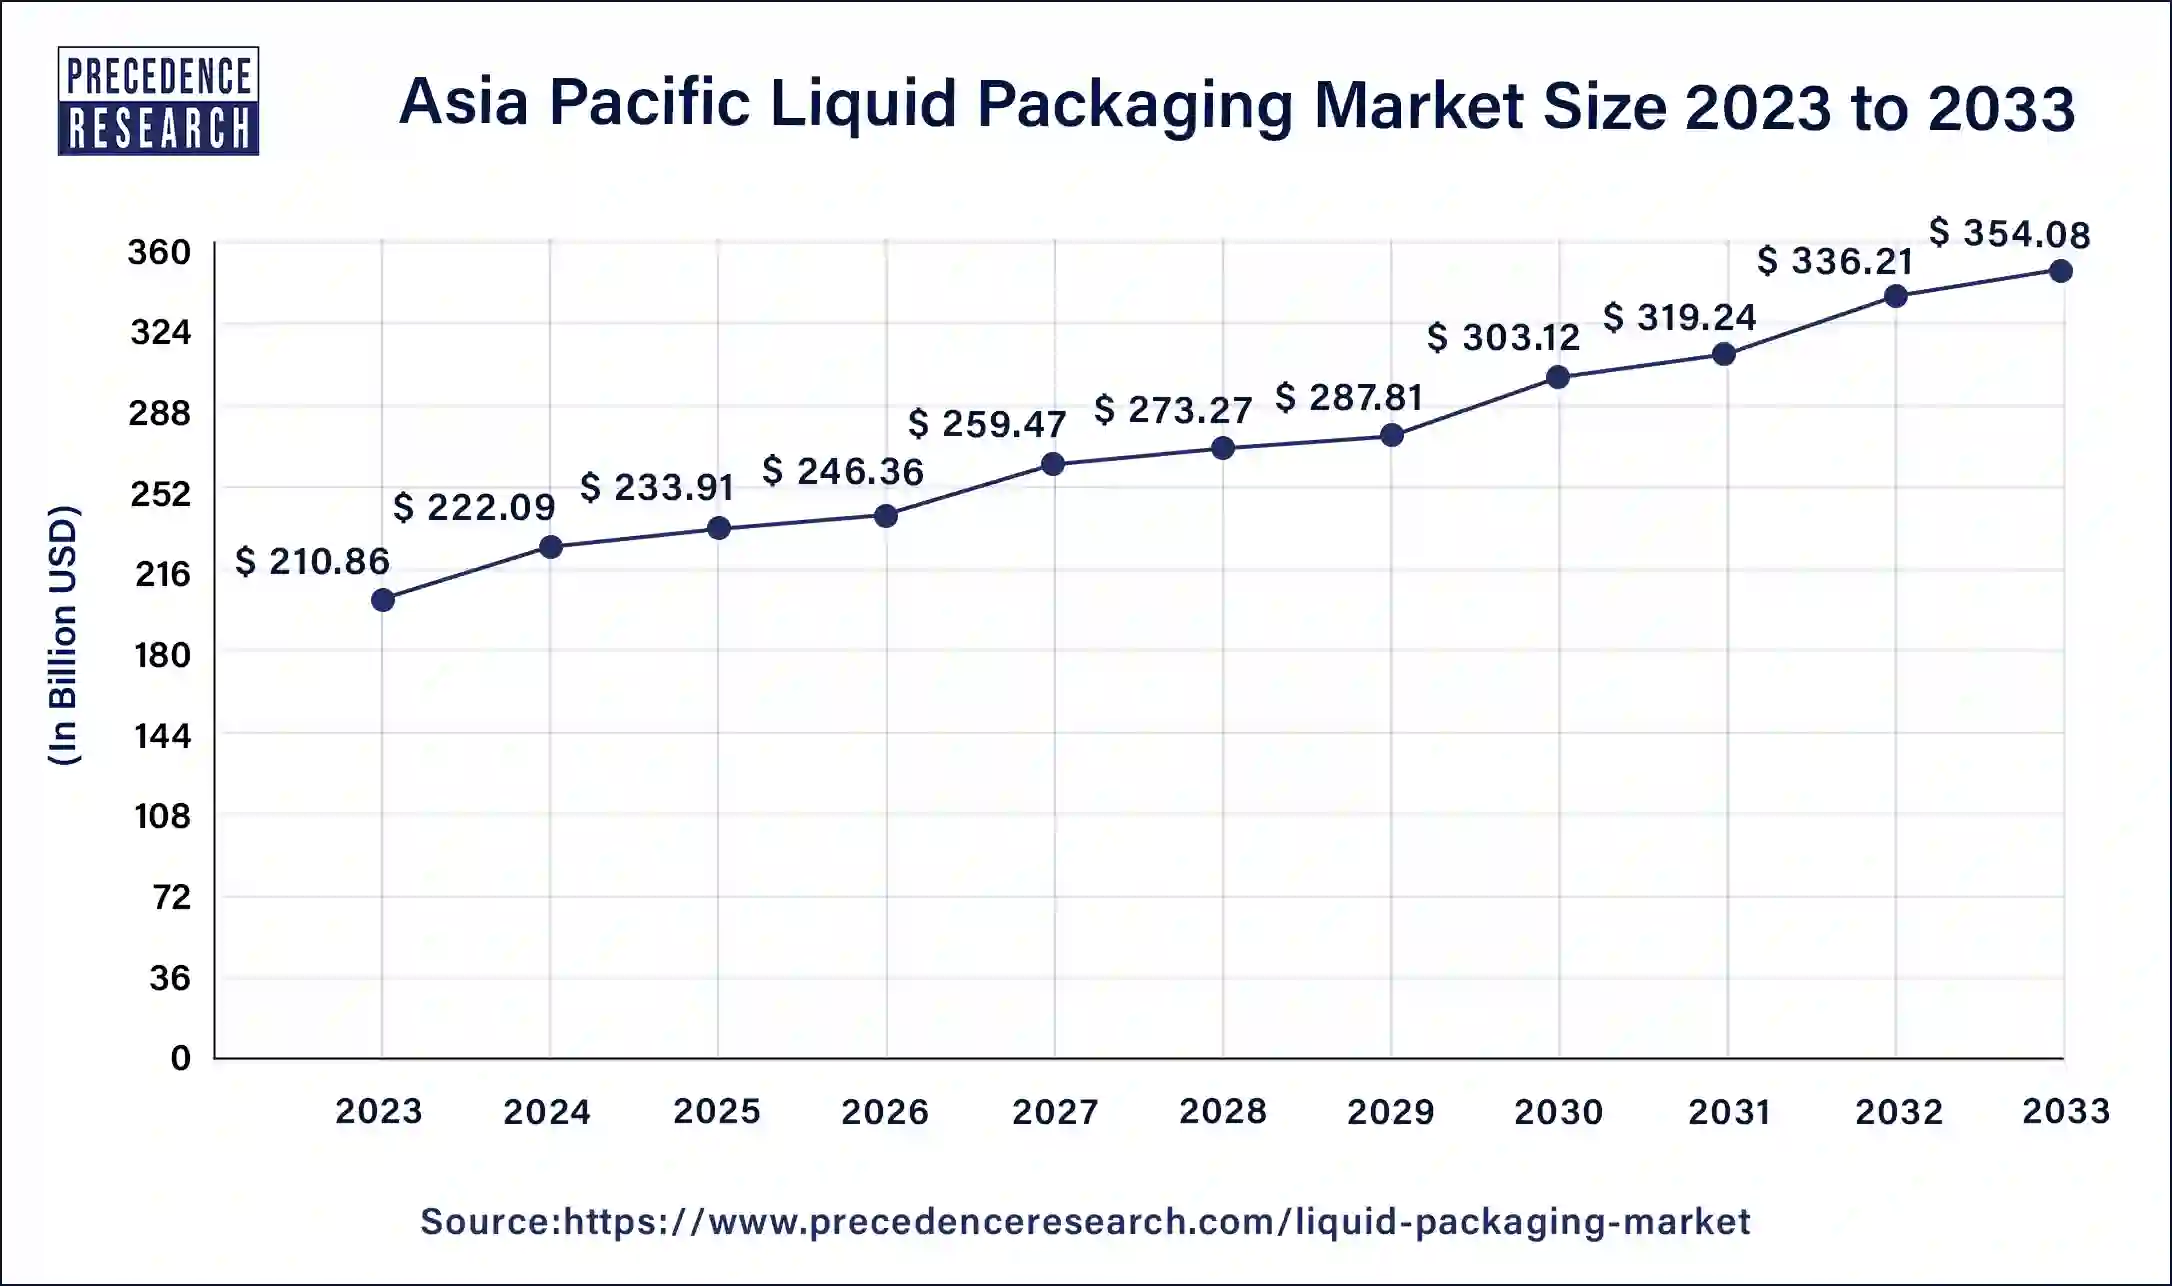 Asia Pacific Liquid Packaging Market Size 2024 to 2033